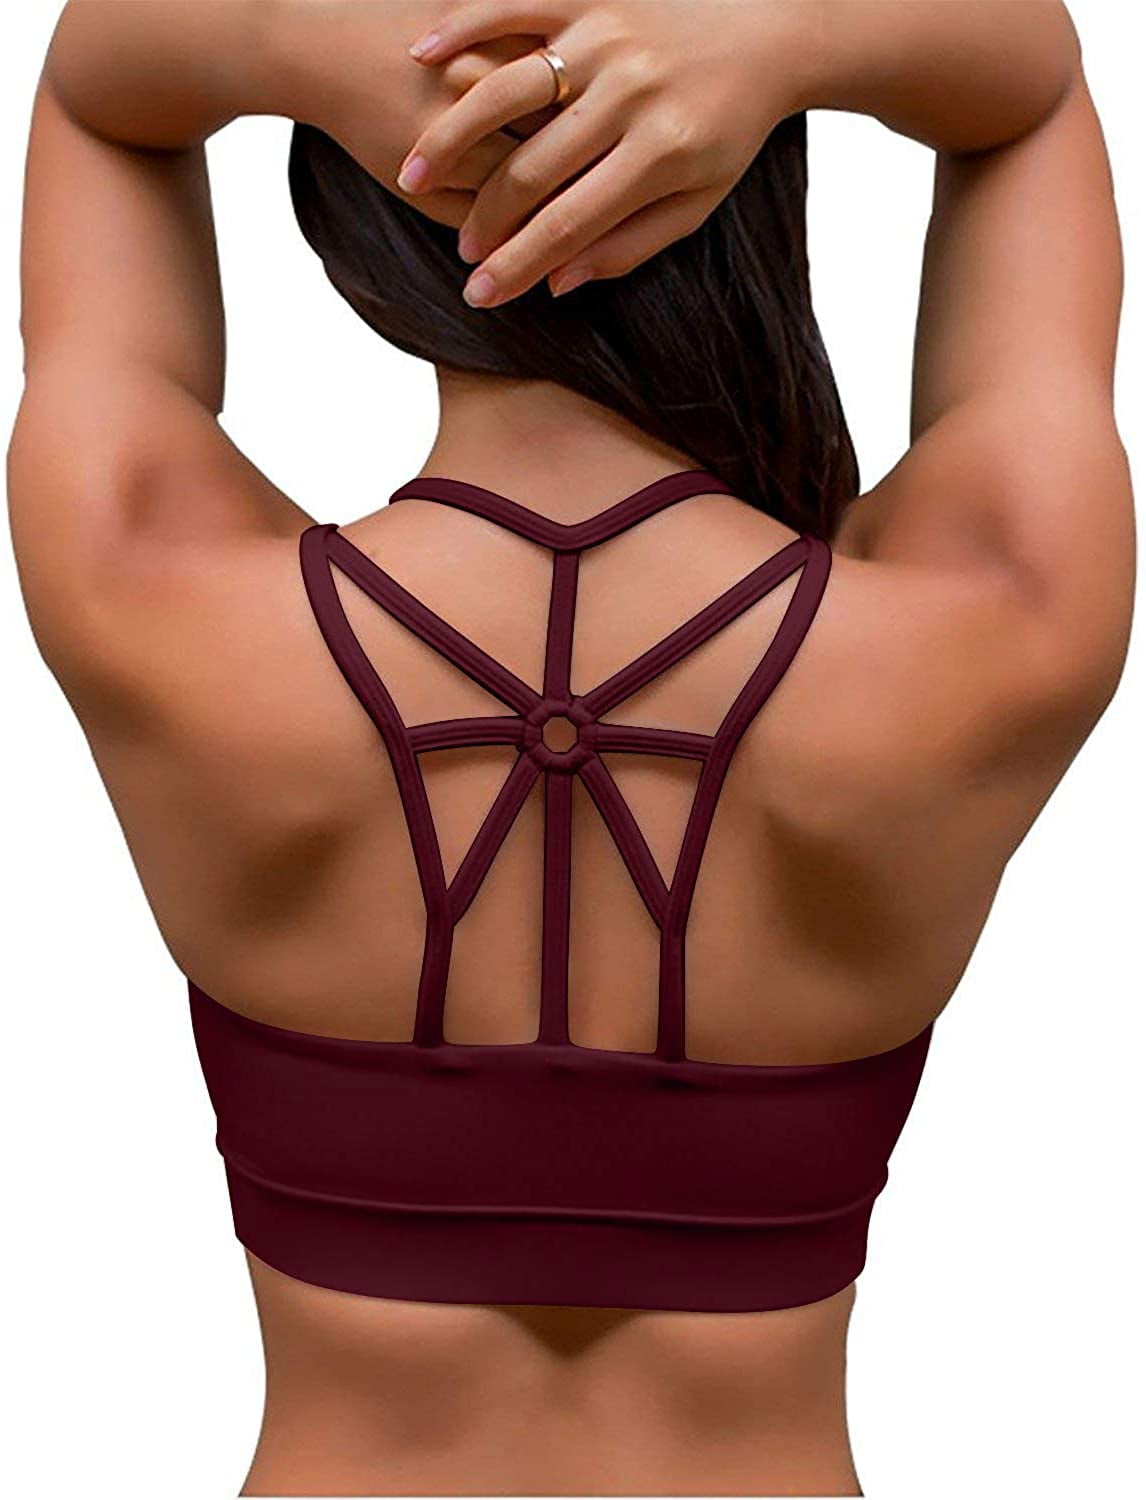 FITTIN Racerback Sports Bras for Women Padded Printed Sports Bras for Yoga Workout Gym Fitness Activewear Bra Tops